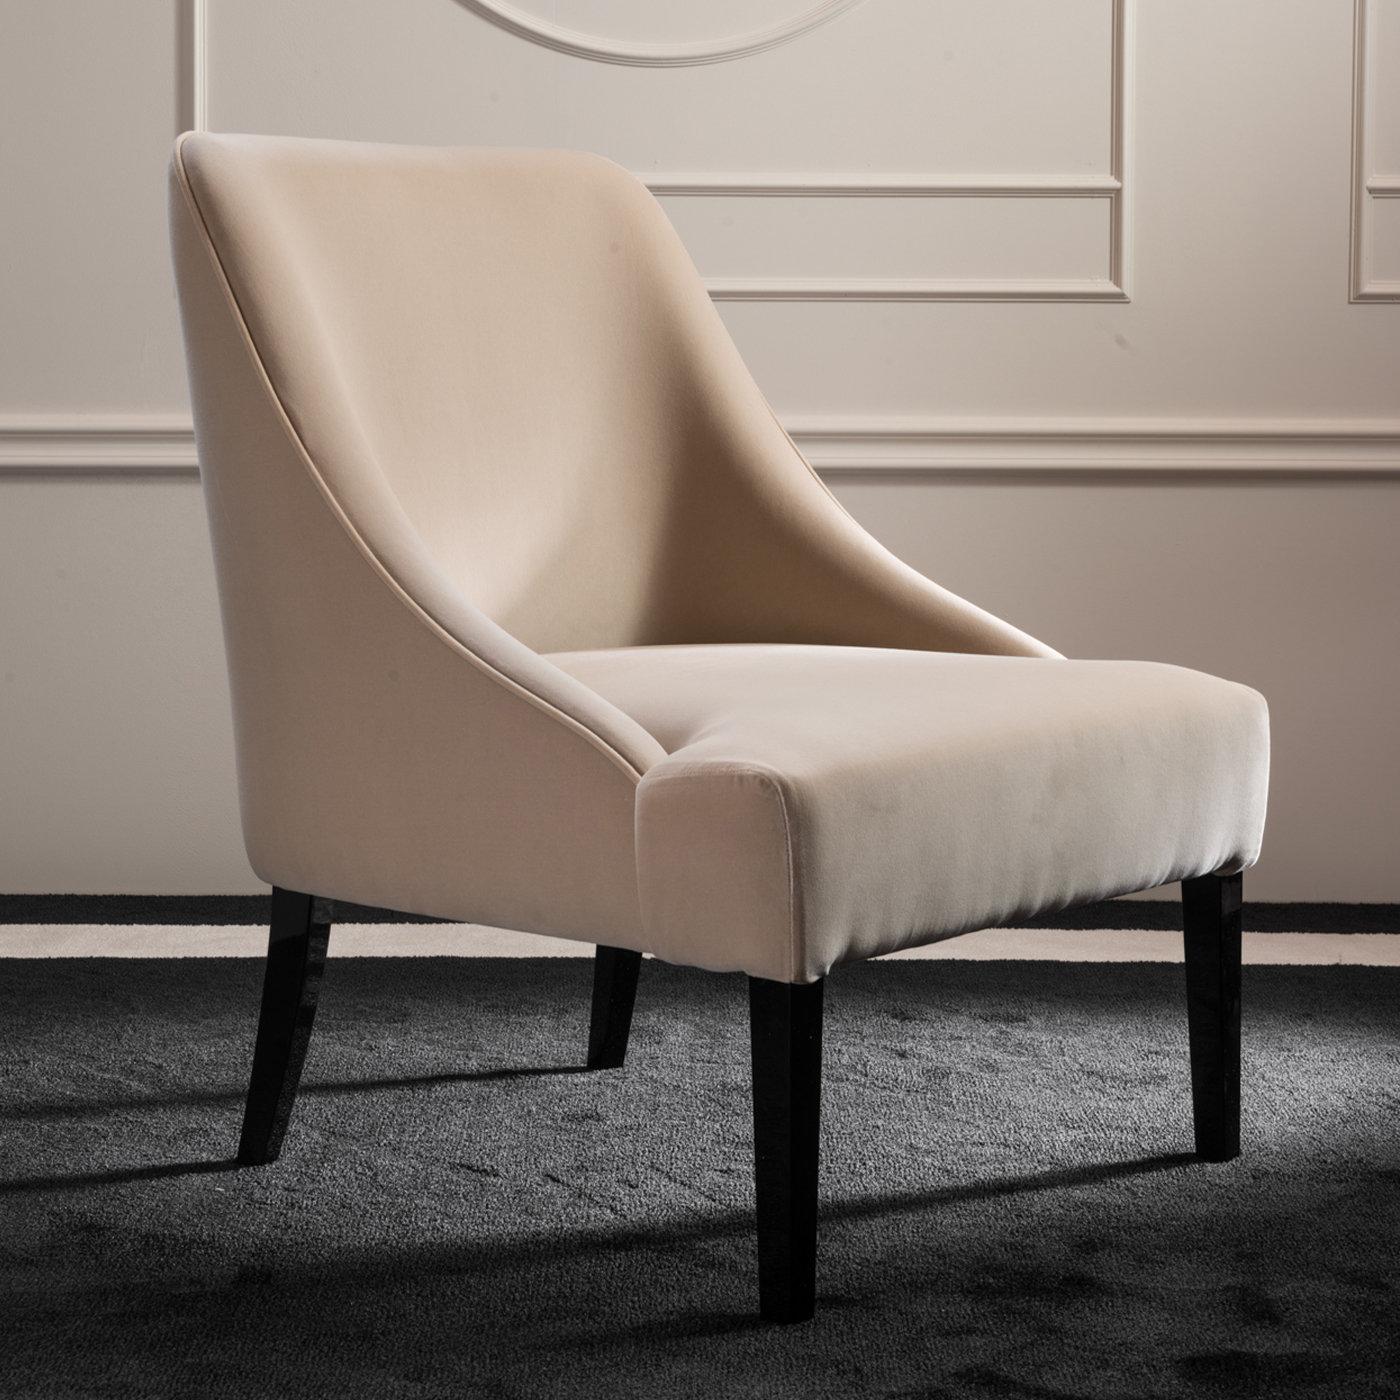 Distinctive for its harmonious and minimalist design, this delicate armchair will as an understated touch of glamour to any modern living room or bedroom. The sturdy wooden frame peeks out in the glossy, black-lacquered legs that support the plush